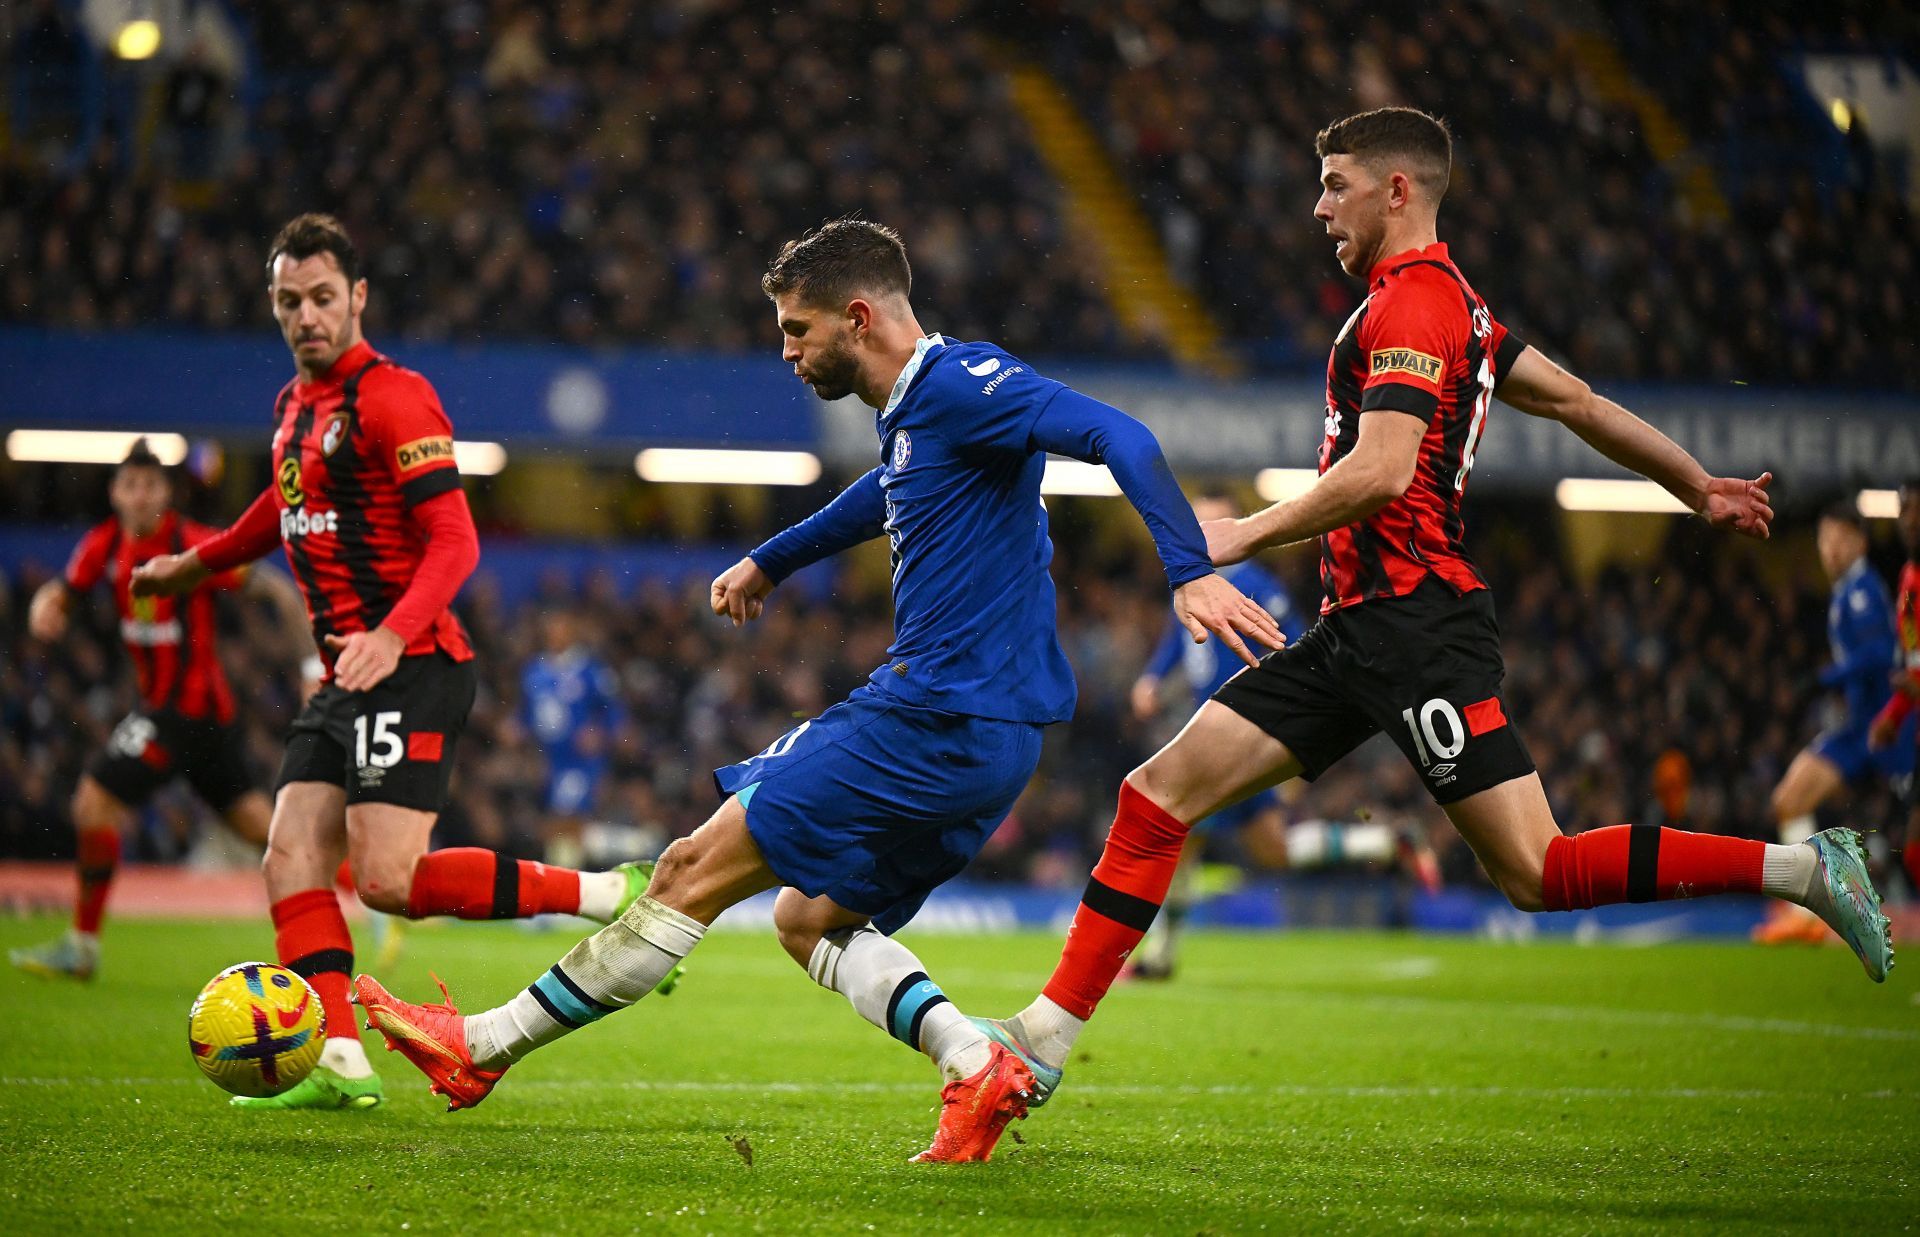 Pulisic playing against Bournemouth.